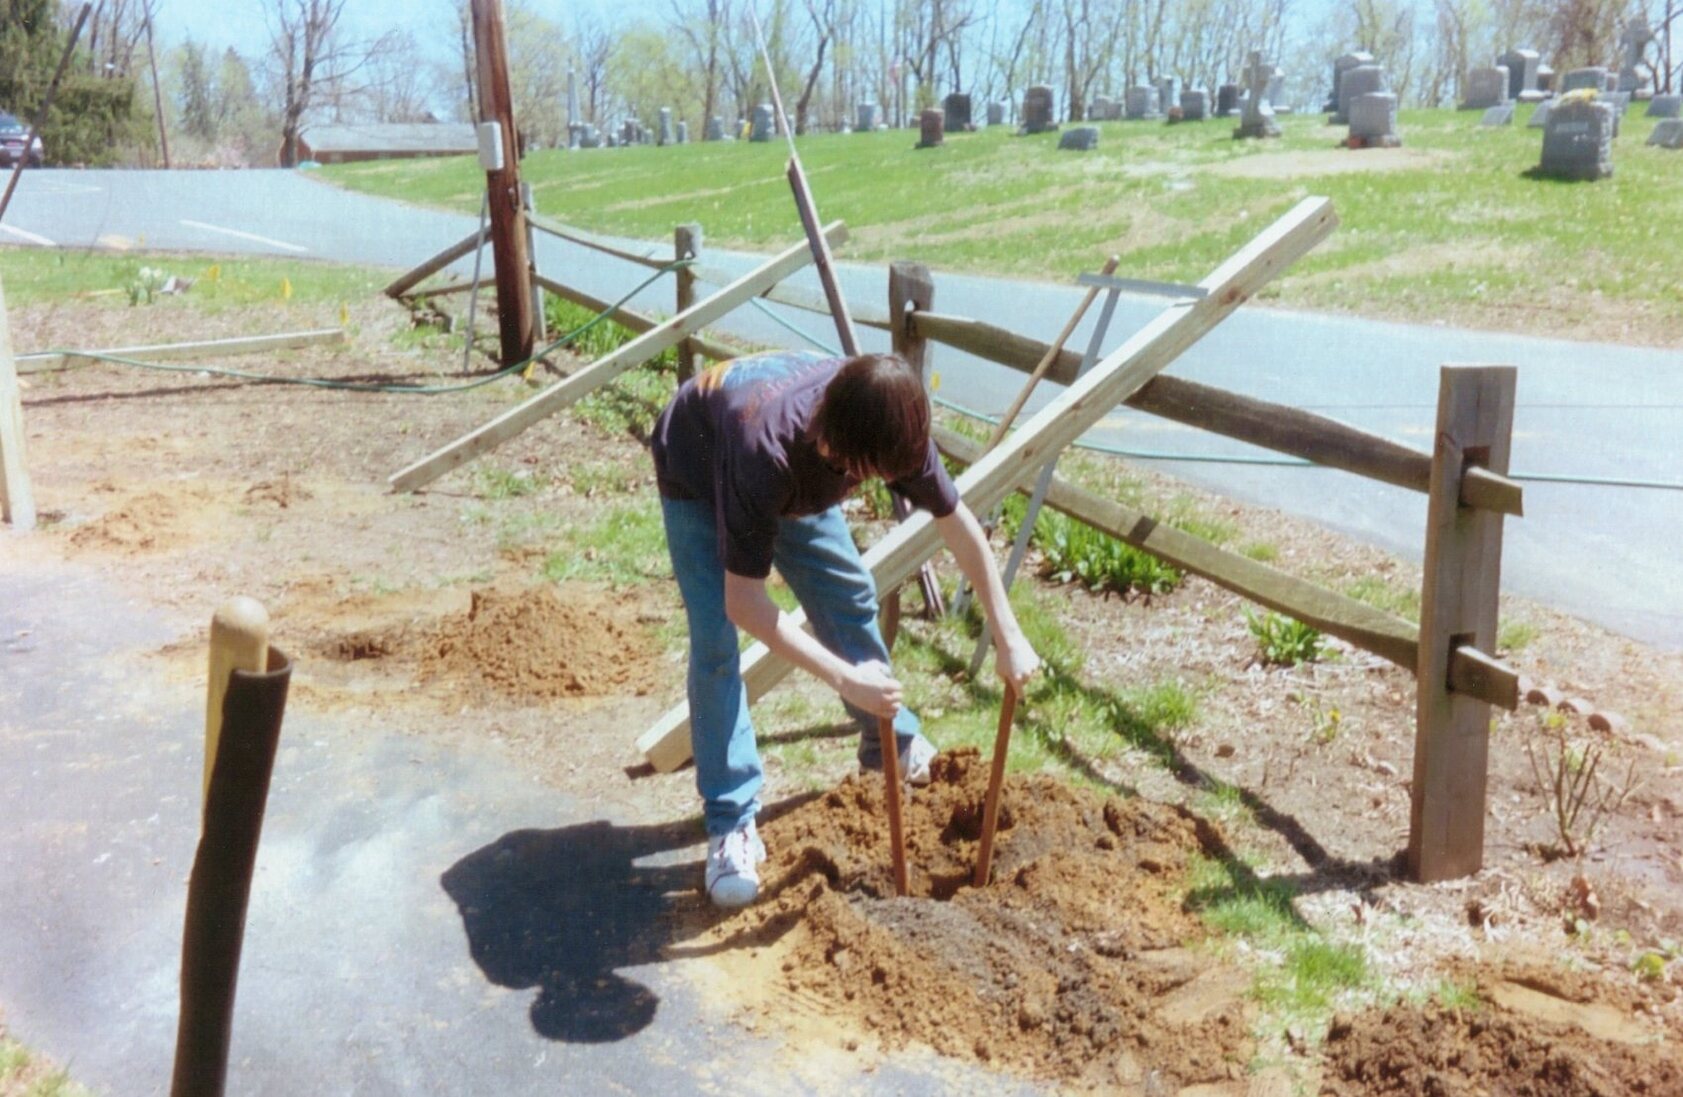 A scout bending down in front of a hole holding onto a post-hole digger inside of the hole.